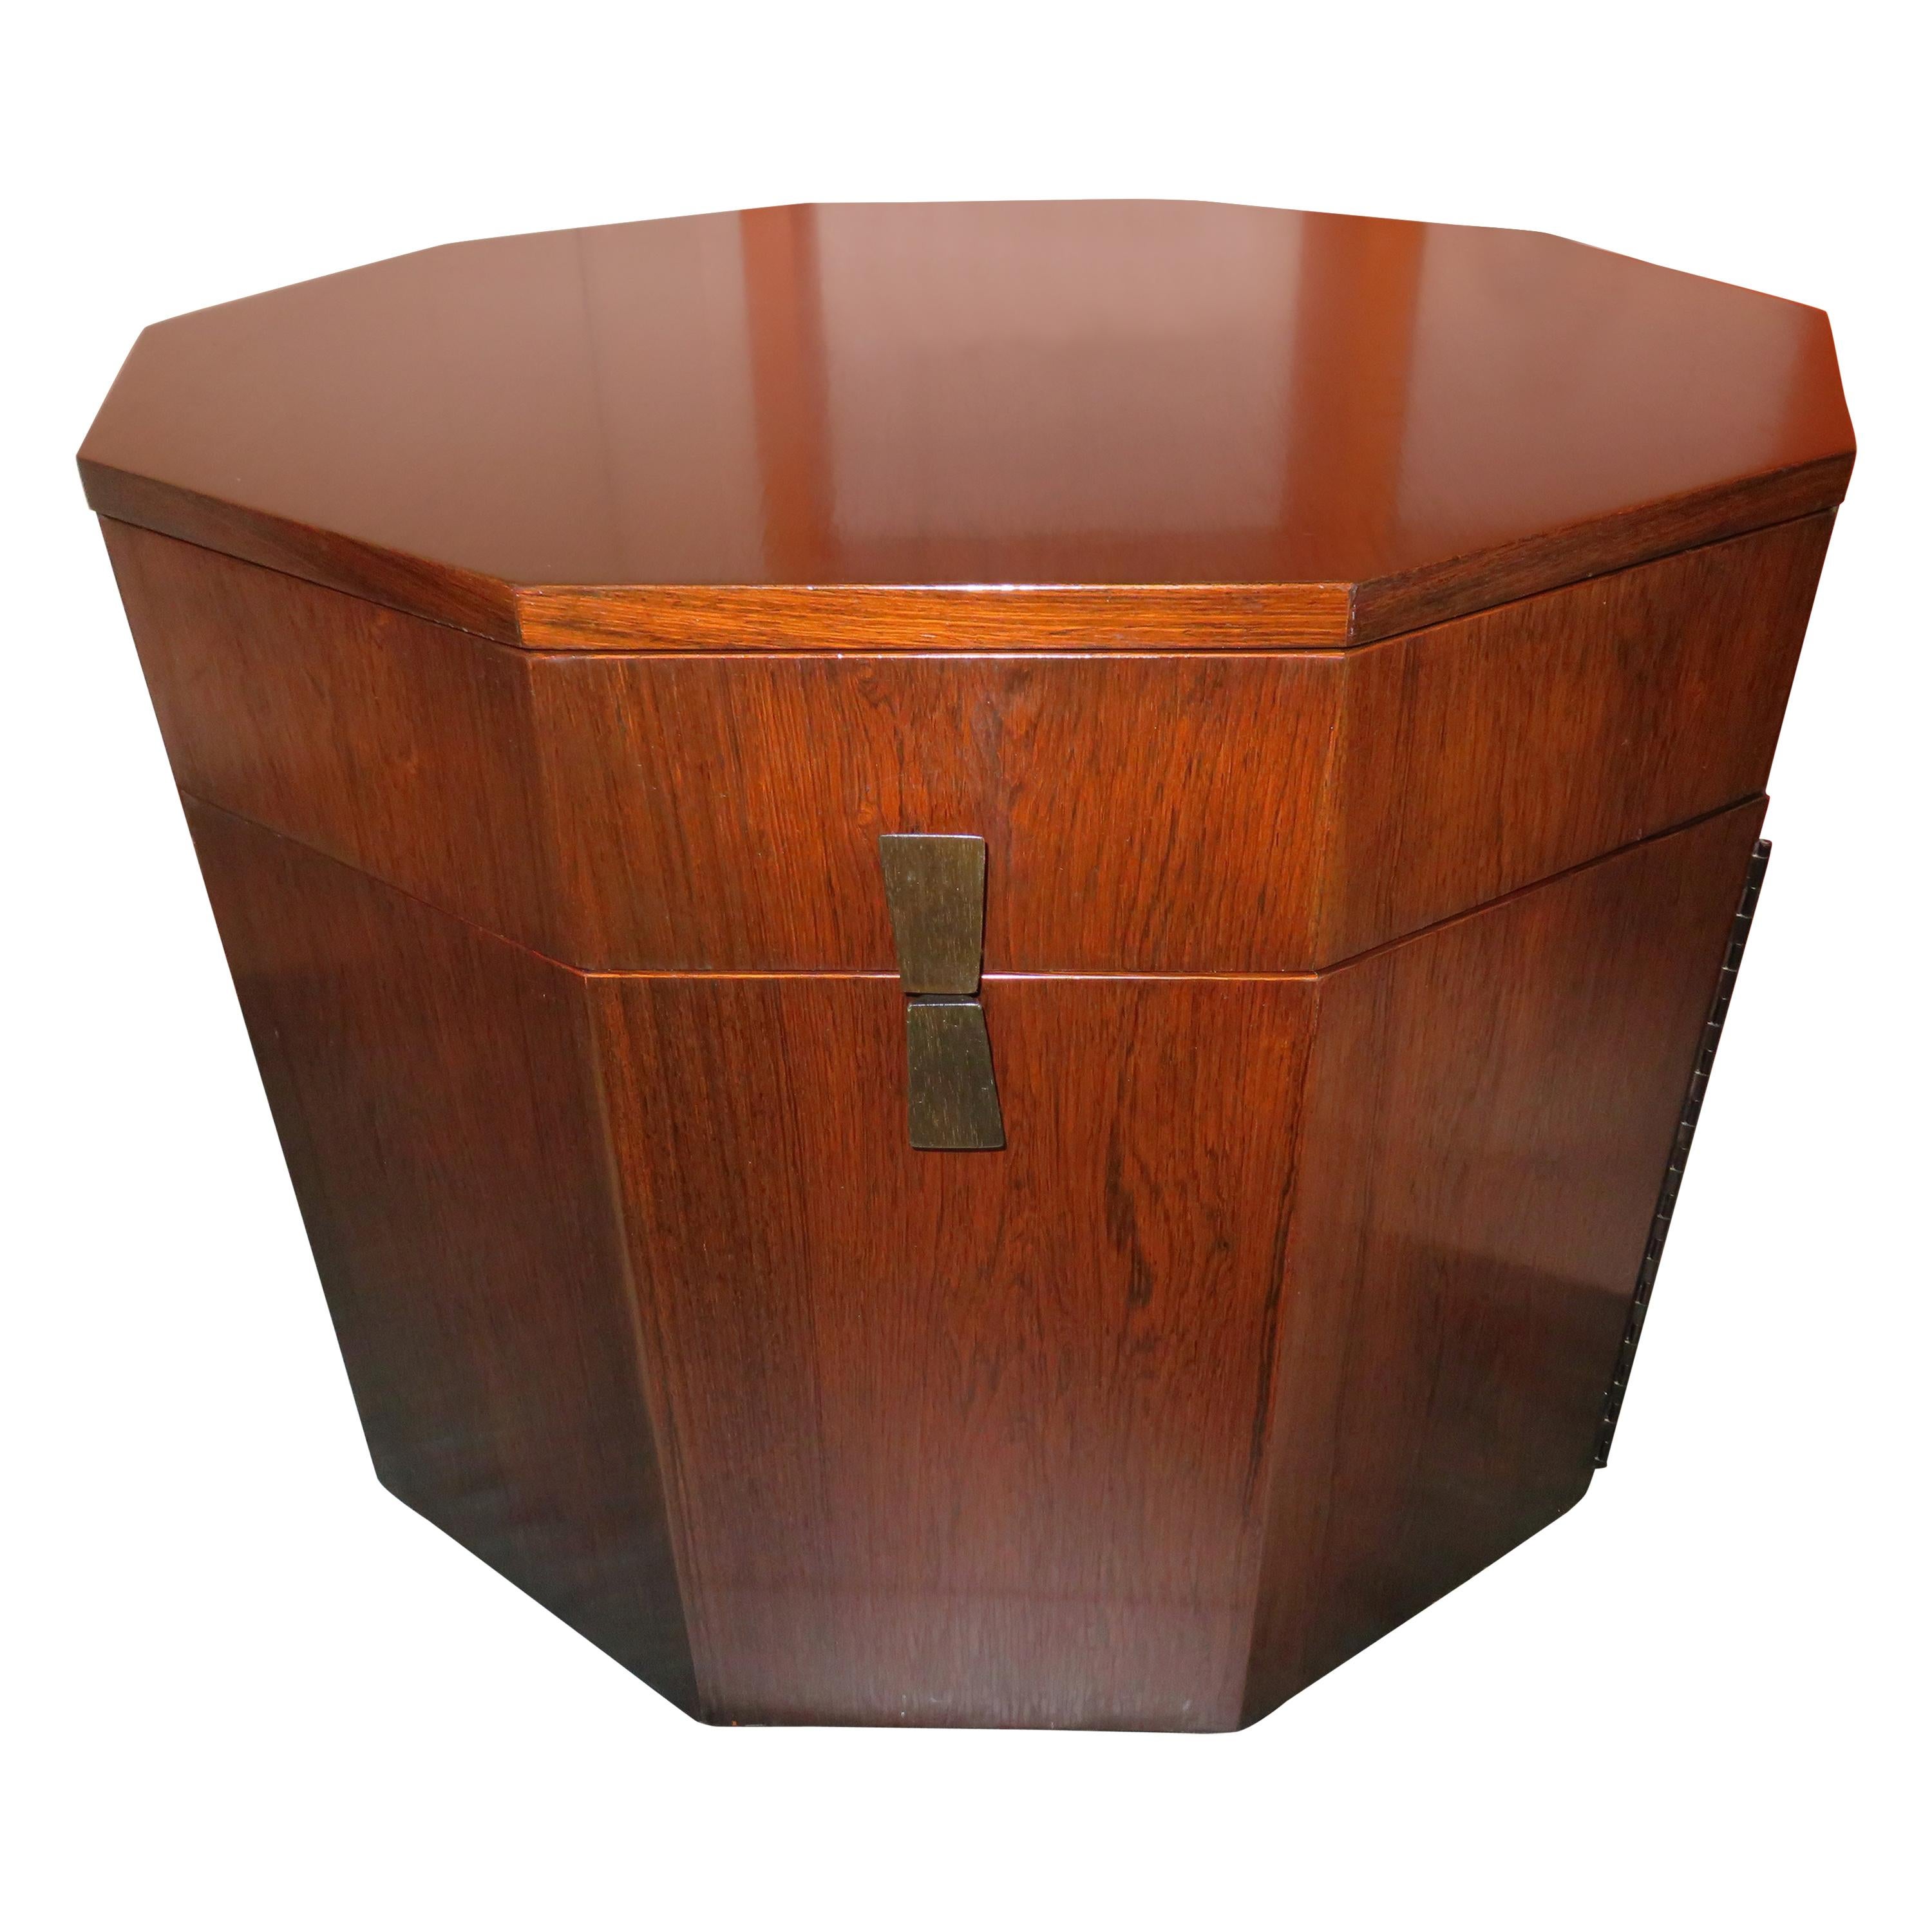 Magnificent Harvey Probber Rosewood Decagon Bar Table Mid-Century Modern